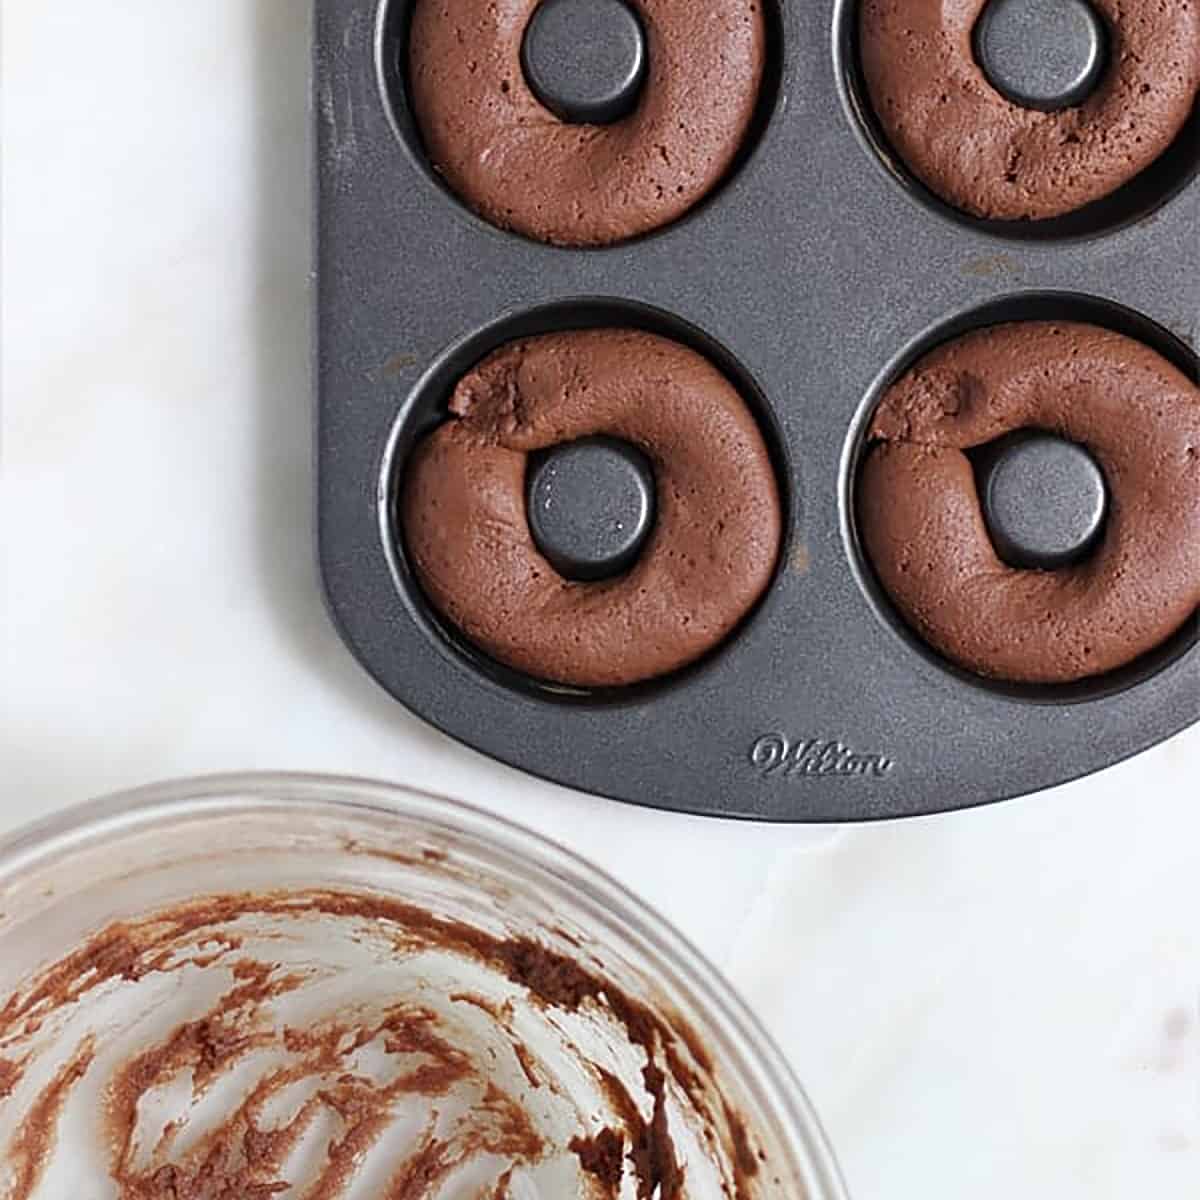 breakfast donuts in a donut pan to be baked.